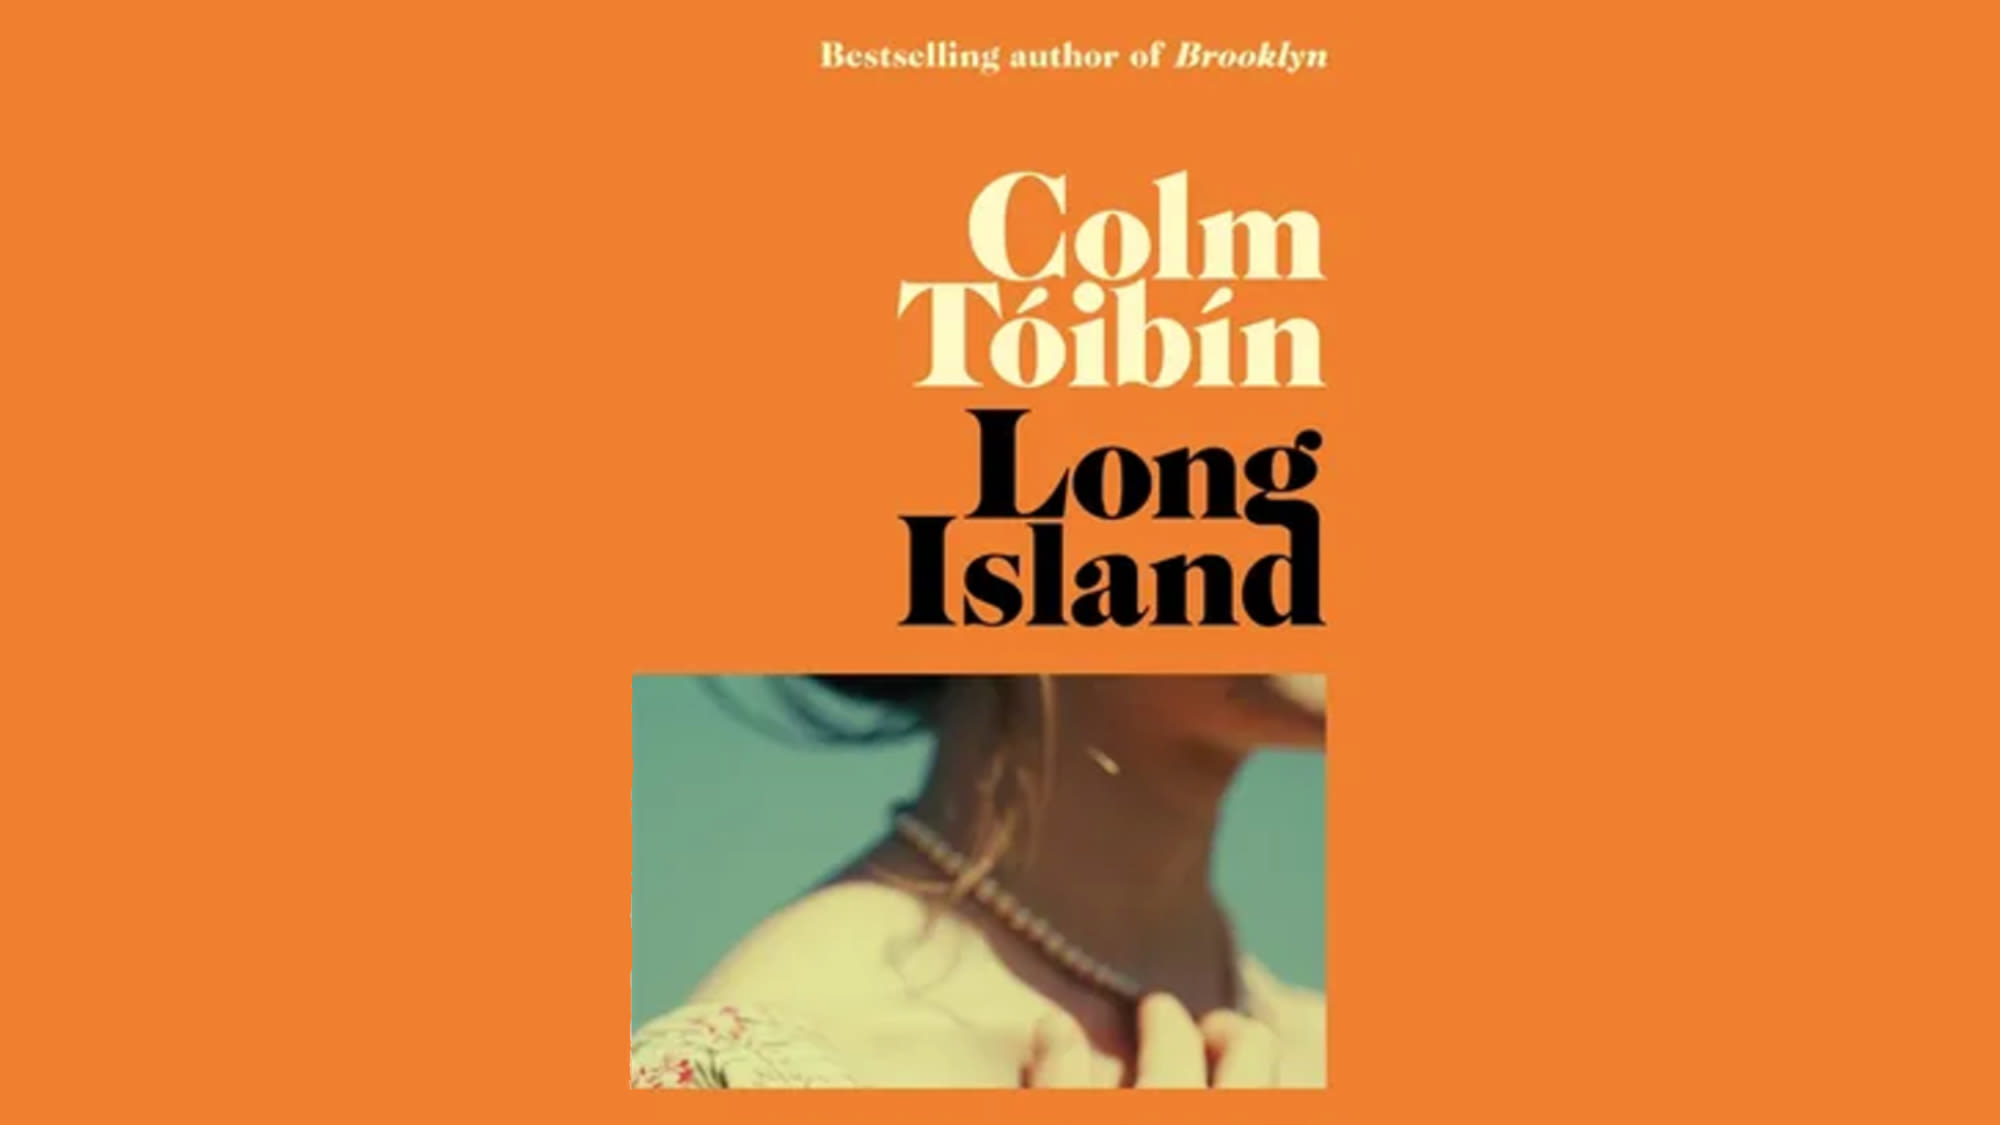 Long Island: a 'magnificent sequel' to Brooklyn